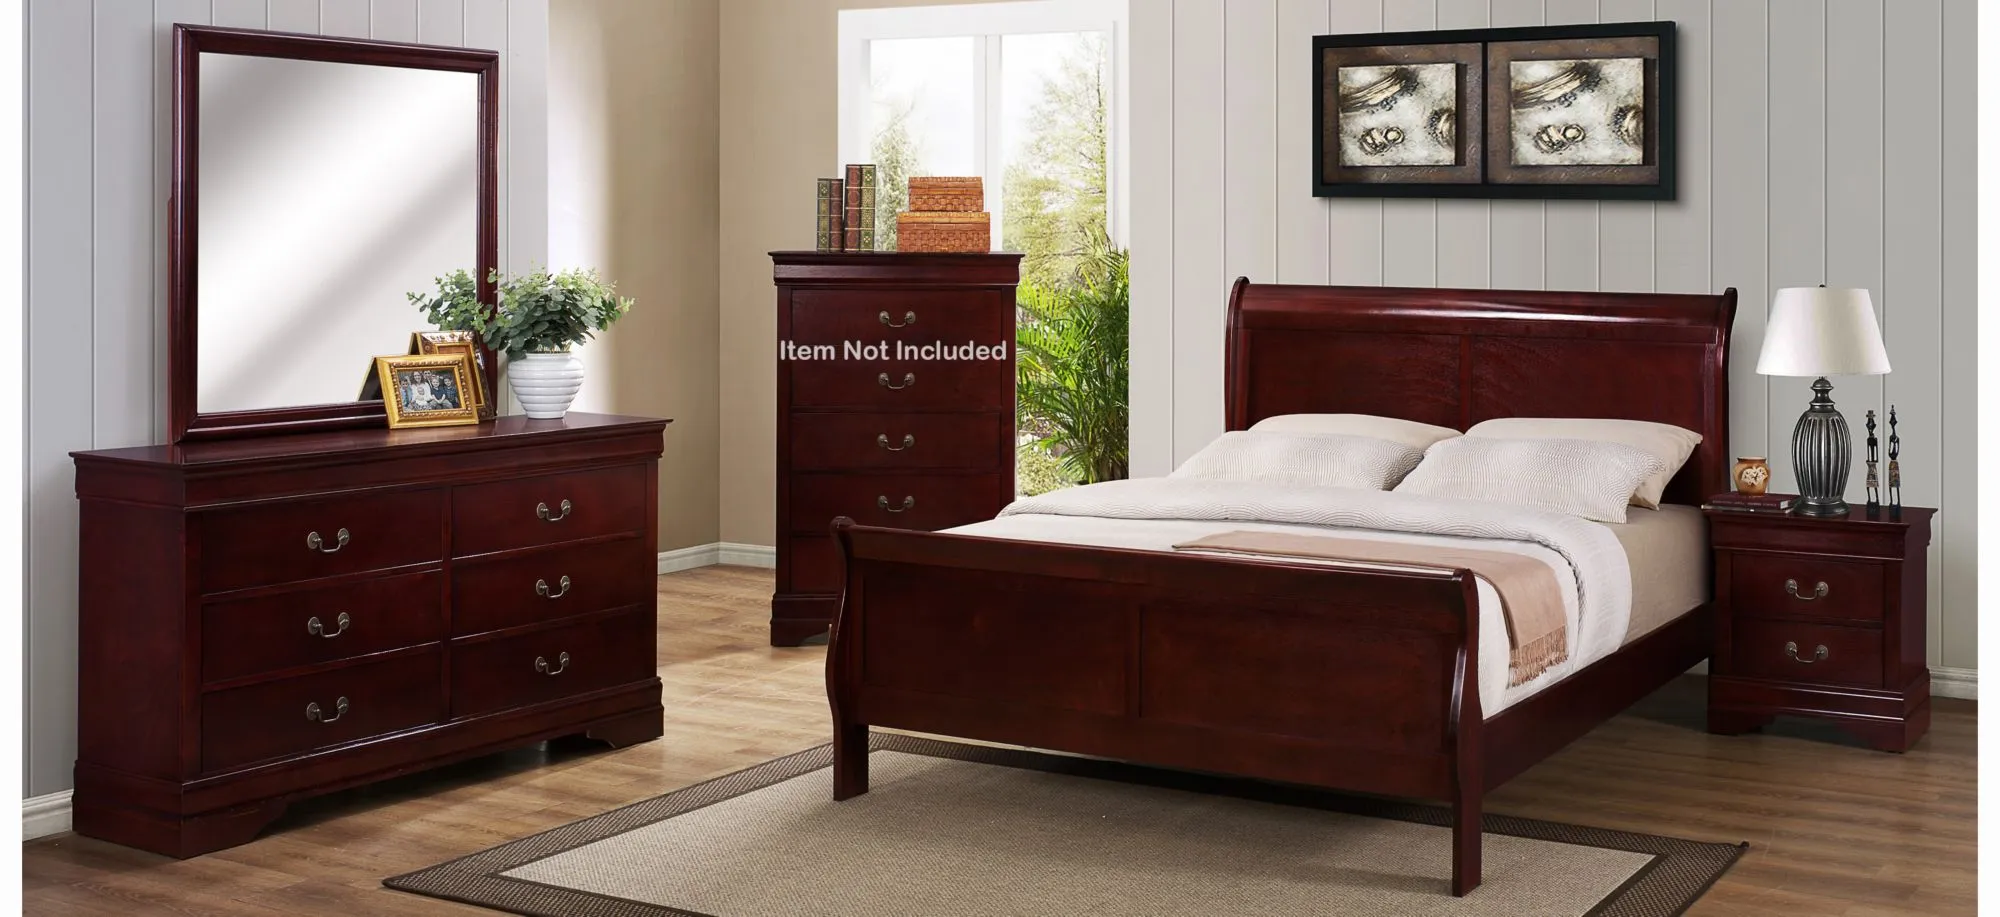 Louis Phillip 4-pc. Bedroom Set in Cherry by Crown Mark